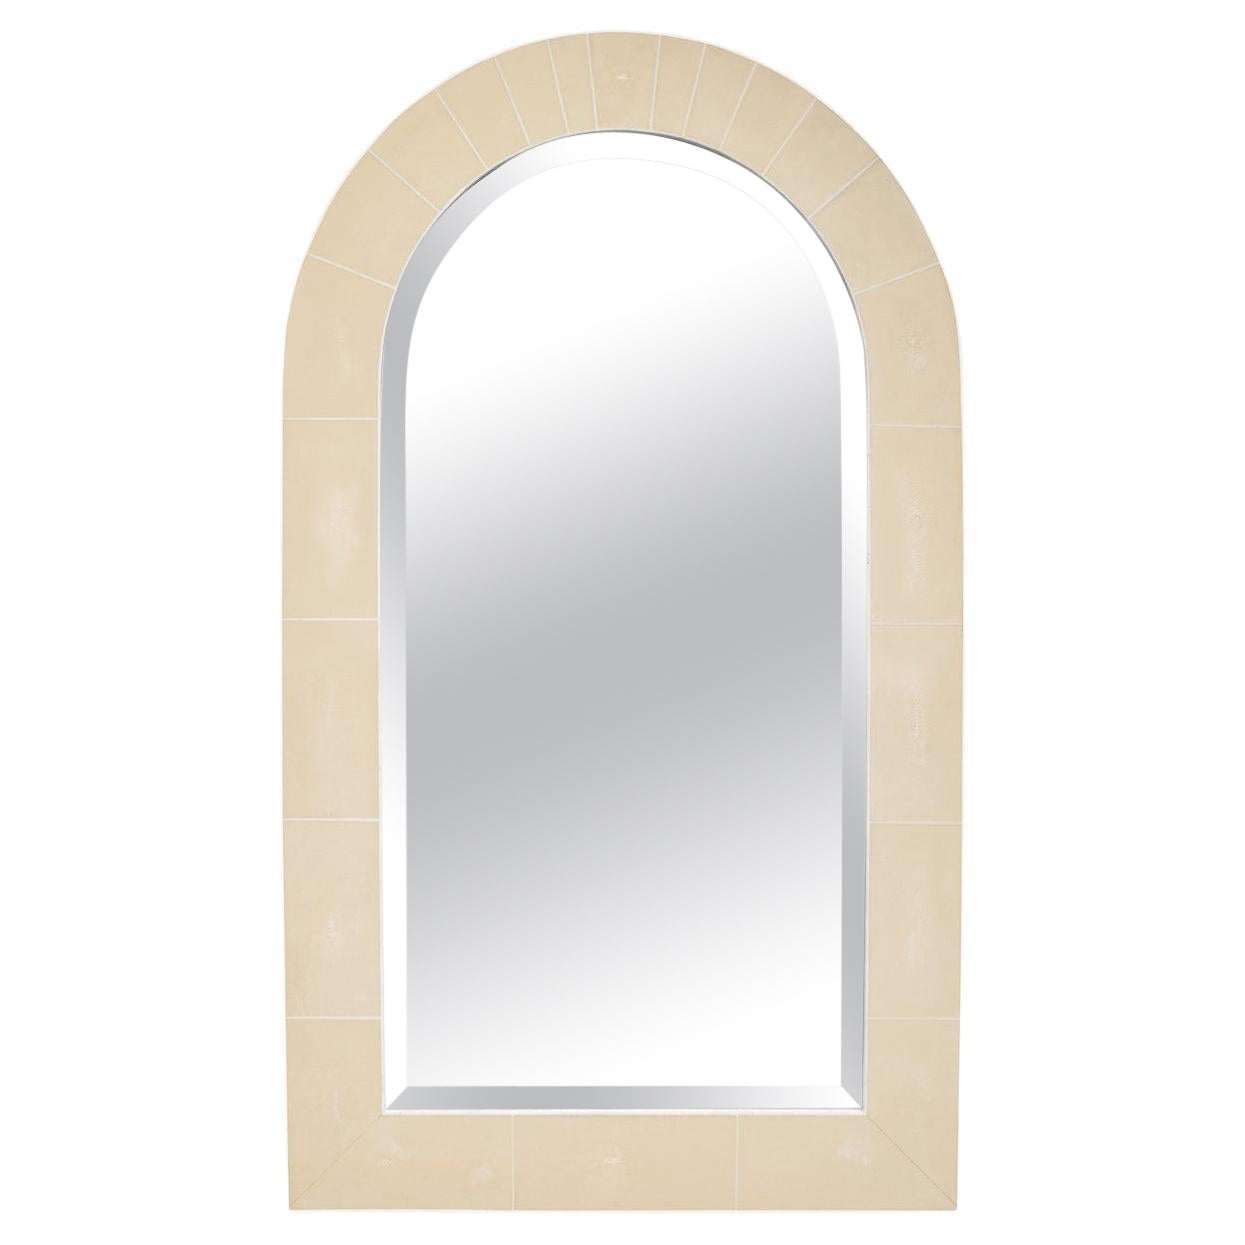 Karl Springer Superb "Dome Top Mirror" in Ivory Shagreen with Bone Inlays 1980s